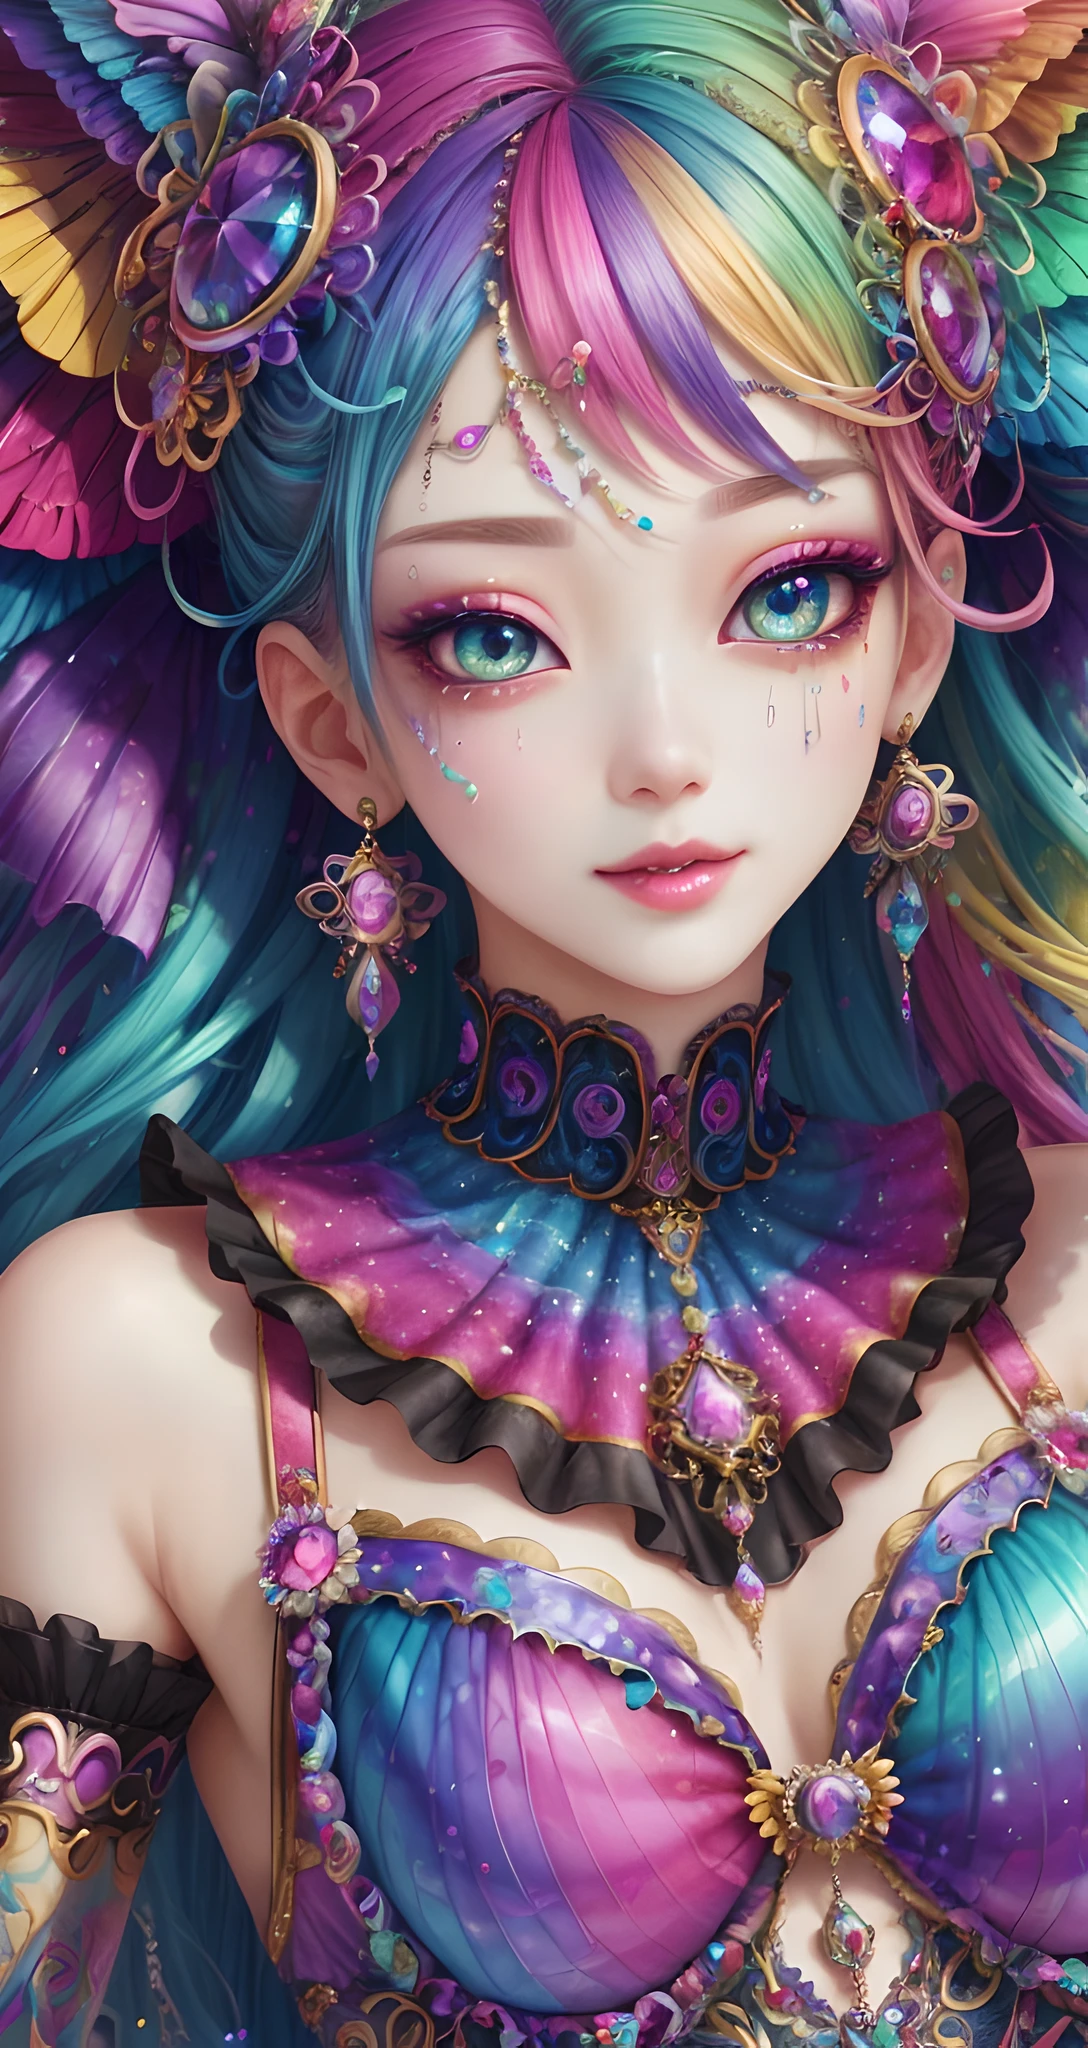 This artwork should be colorful and evoke feelings of euphoria and ecstasy. Generate a beautiful fantasy woman with an interesting and dynamic manic expression. The woman is dressed in the style of Harajuku decora fashion. There are many intricate and highly detailed decora fashion accents. Clothing is ornate and extravagant with contrasting colors, textures, and patterns. Include strong influences from Lisa Frank. Include many awe-inspiring fantasy elements. ((Include phantasmal iridescence, crystals, bumps, and rainbow colors that drip like paint through the artwork.)) Rainbow paint should drip through hair and onto face and body. Pay particular attention to a beautifully detailed face with realistic shading. Include 8k eyes, highly detailed eyes, realistically detailed eyes, macro eyes, bright eyes. The overall feeling of this artwork should be happiness and excitement. The artwork should be highly ornate. Impress me. The artwork should be highly creative and ultra ornate. Include many decora decorations and accessories.